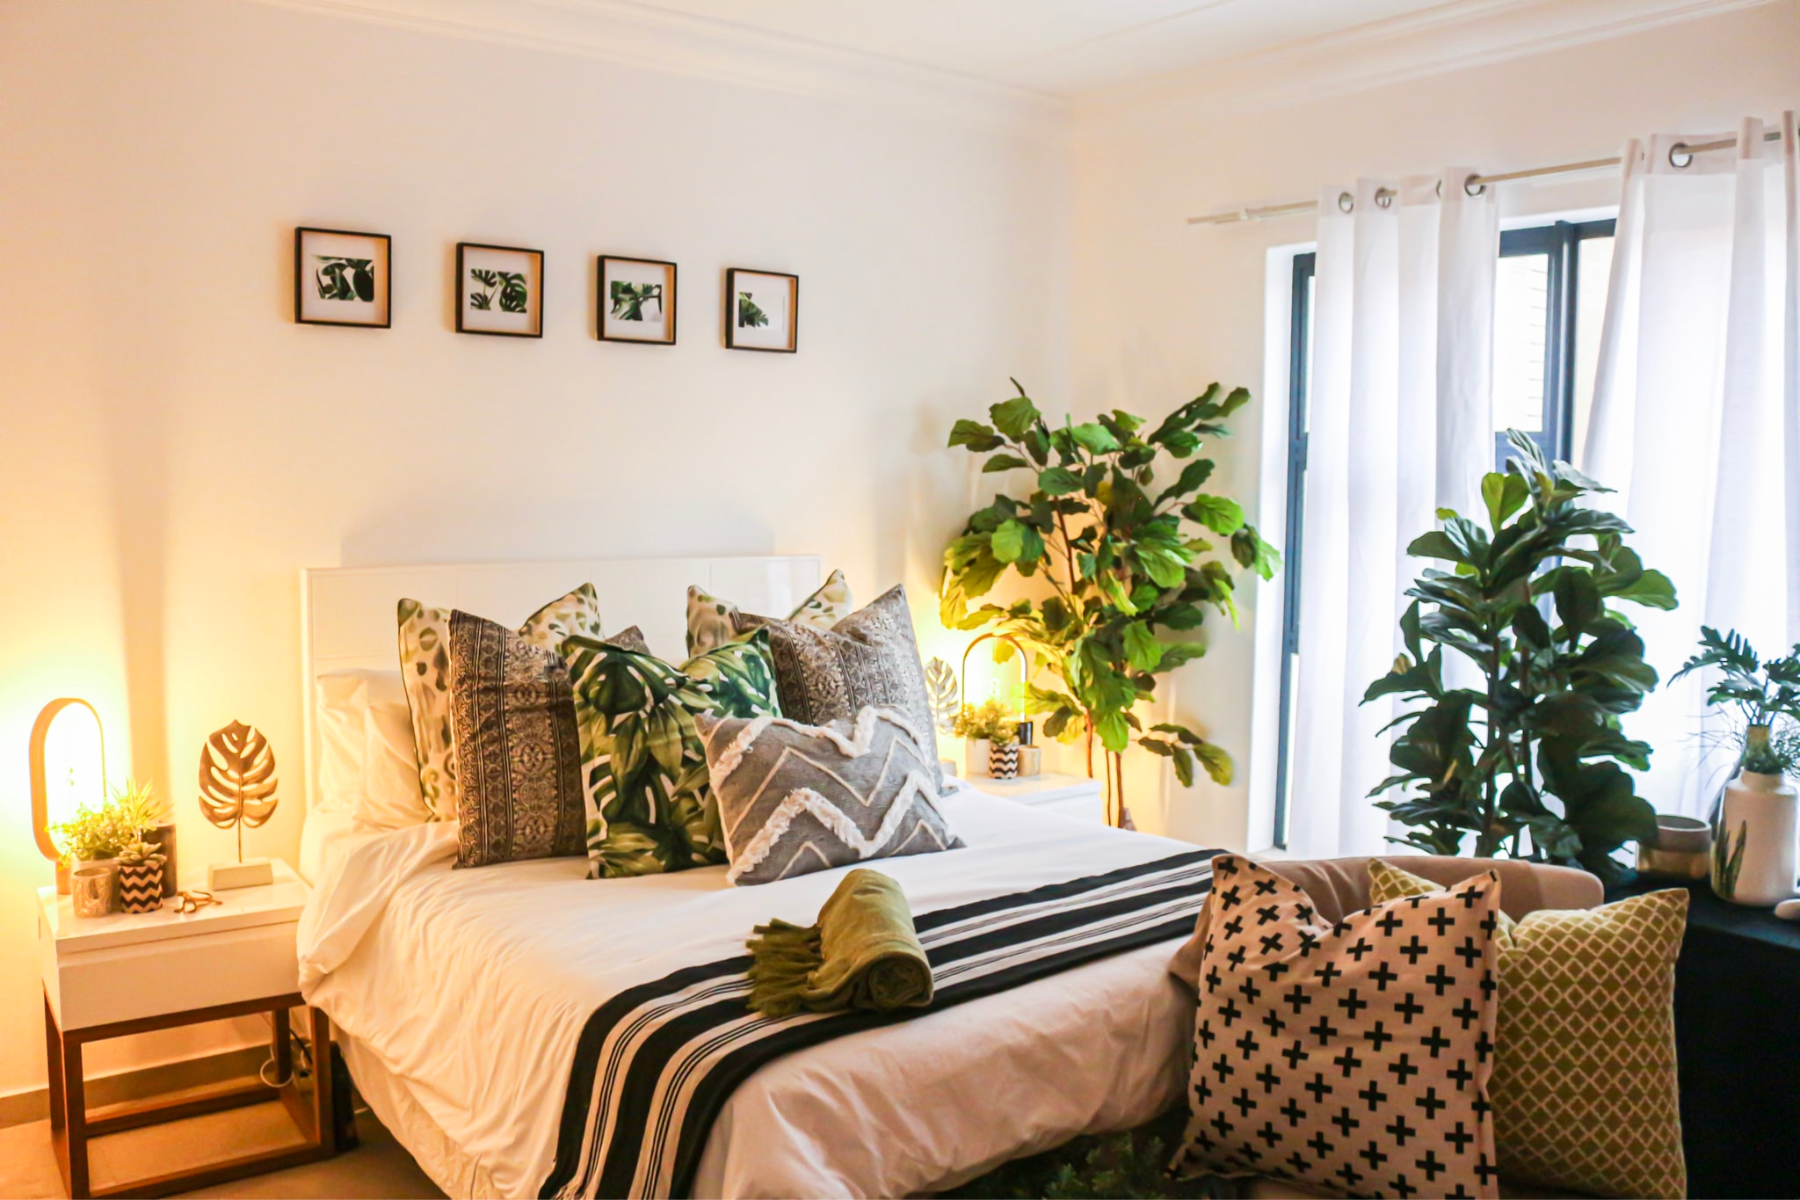 Gorgeous Bedroom Decor Ideas With Plants   The Clever Side